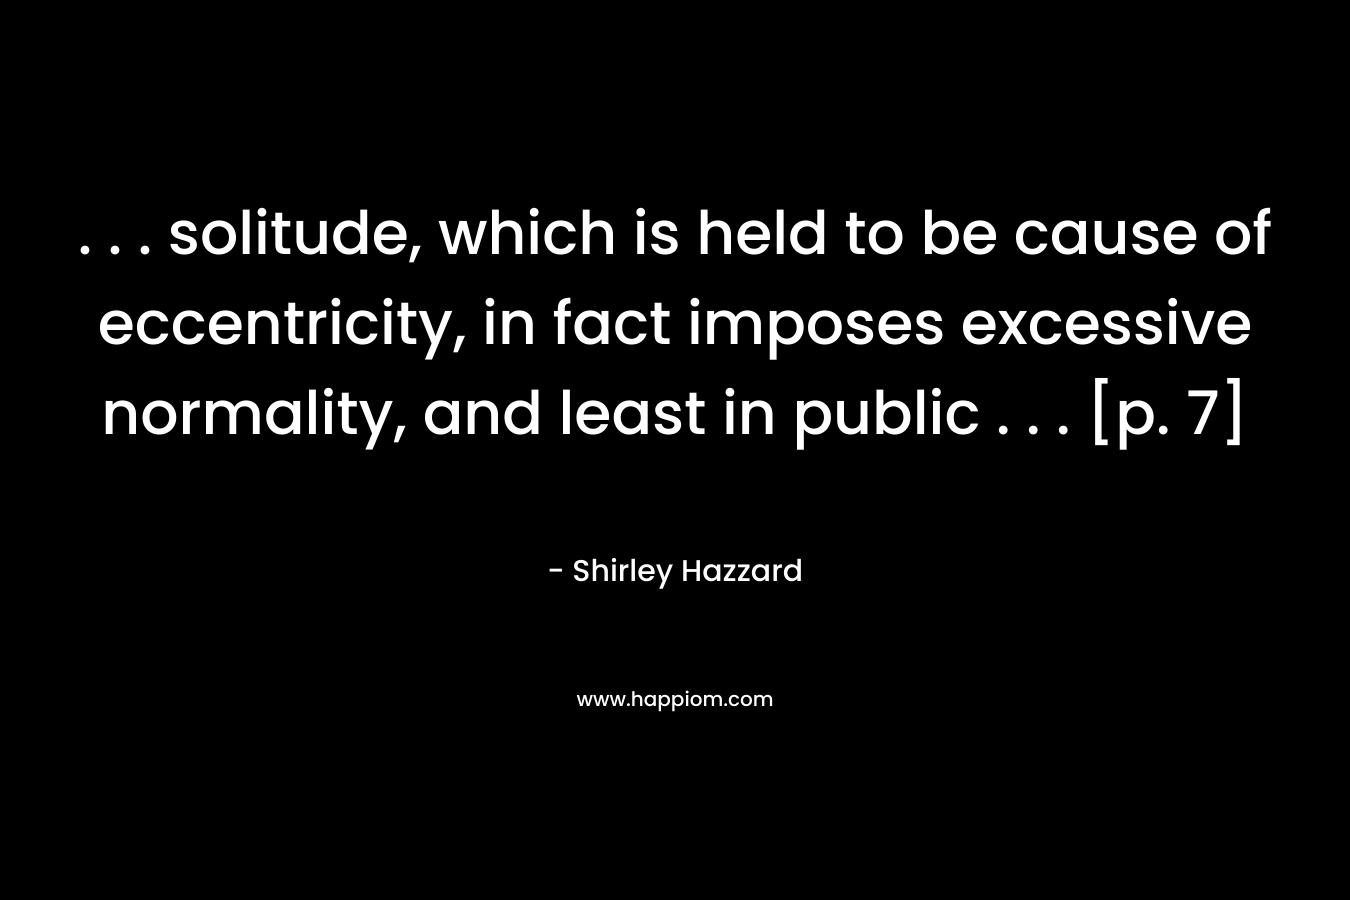 . . . solitude, which is held to be cause of eccentricity, in fact imposes excessive normality, and least in public . . . [p. 7] – Shirley Hazzard